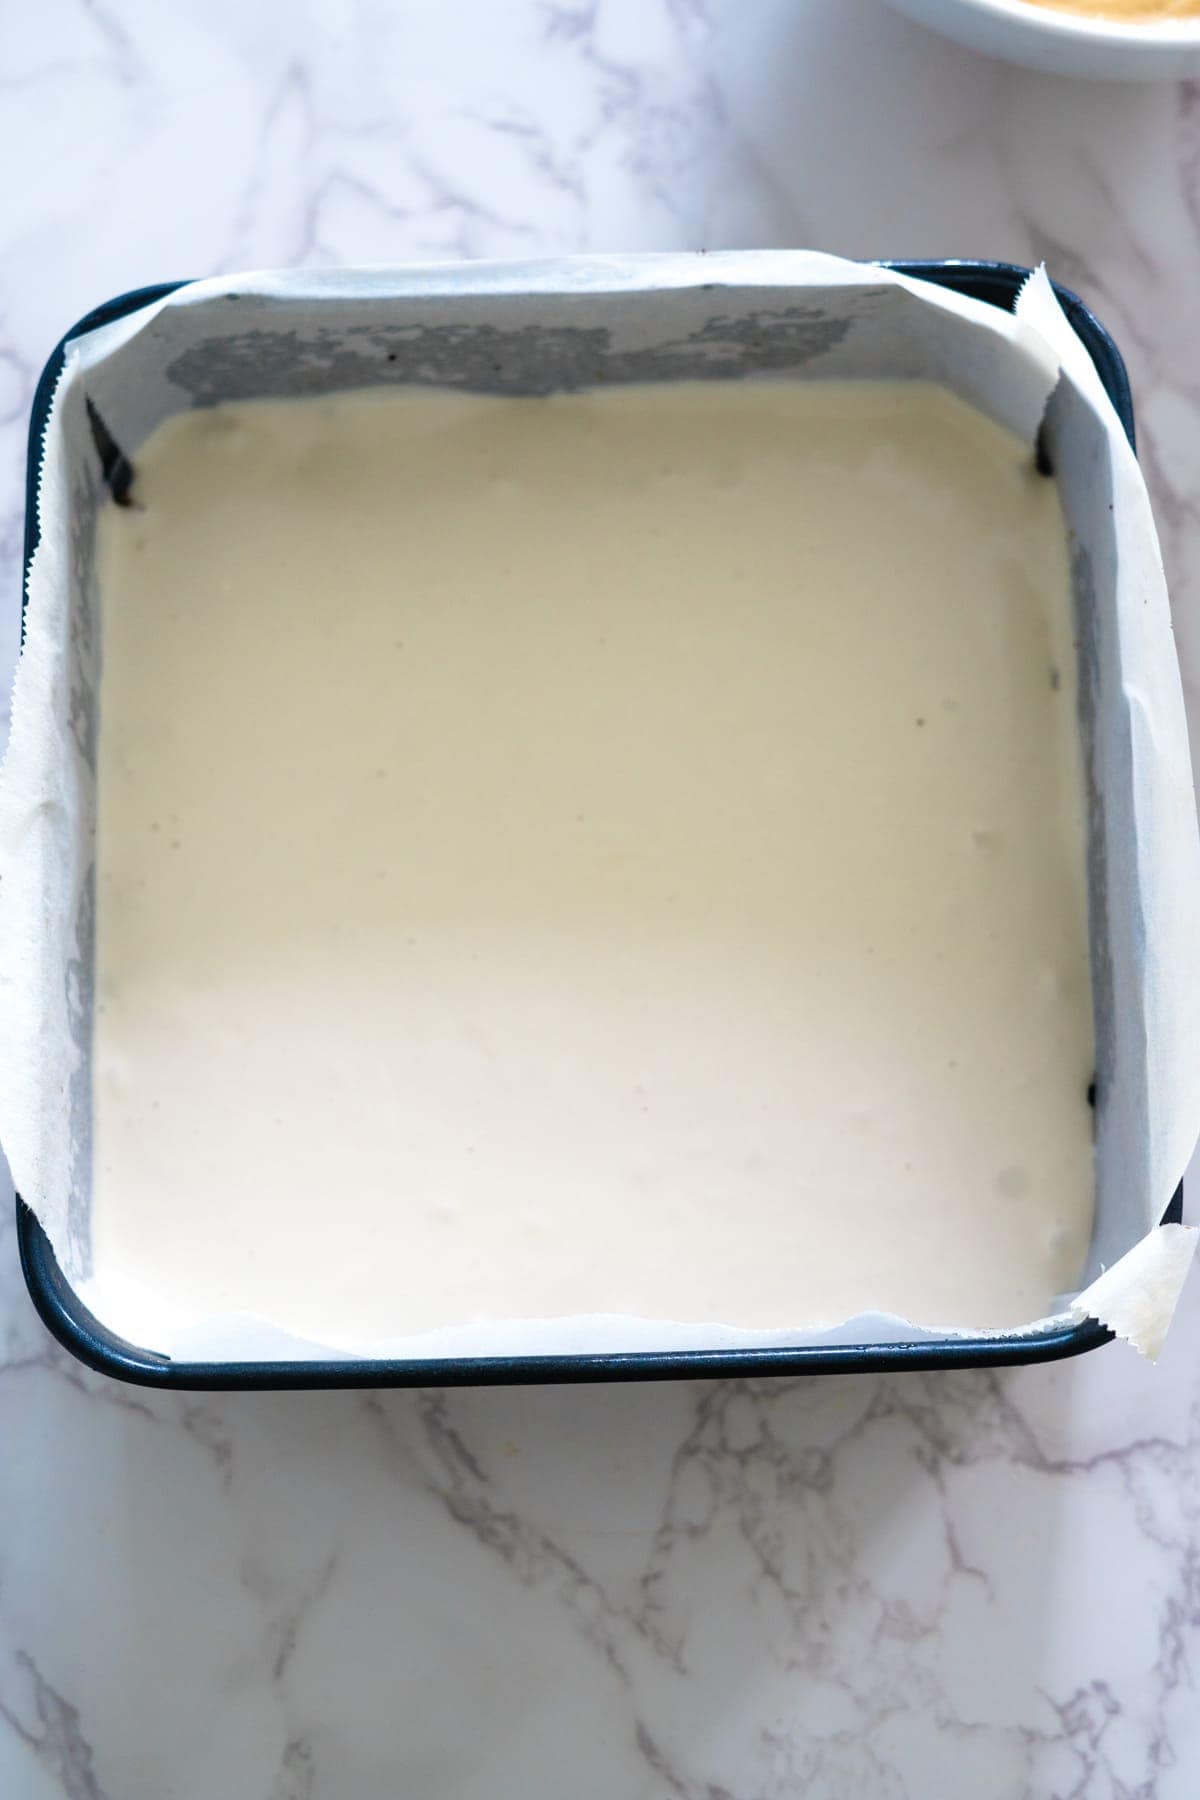 A white cake in a baking pan on a marble counter.